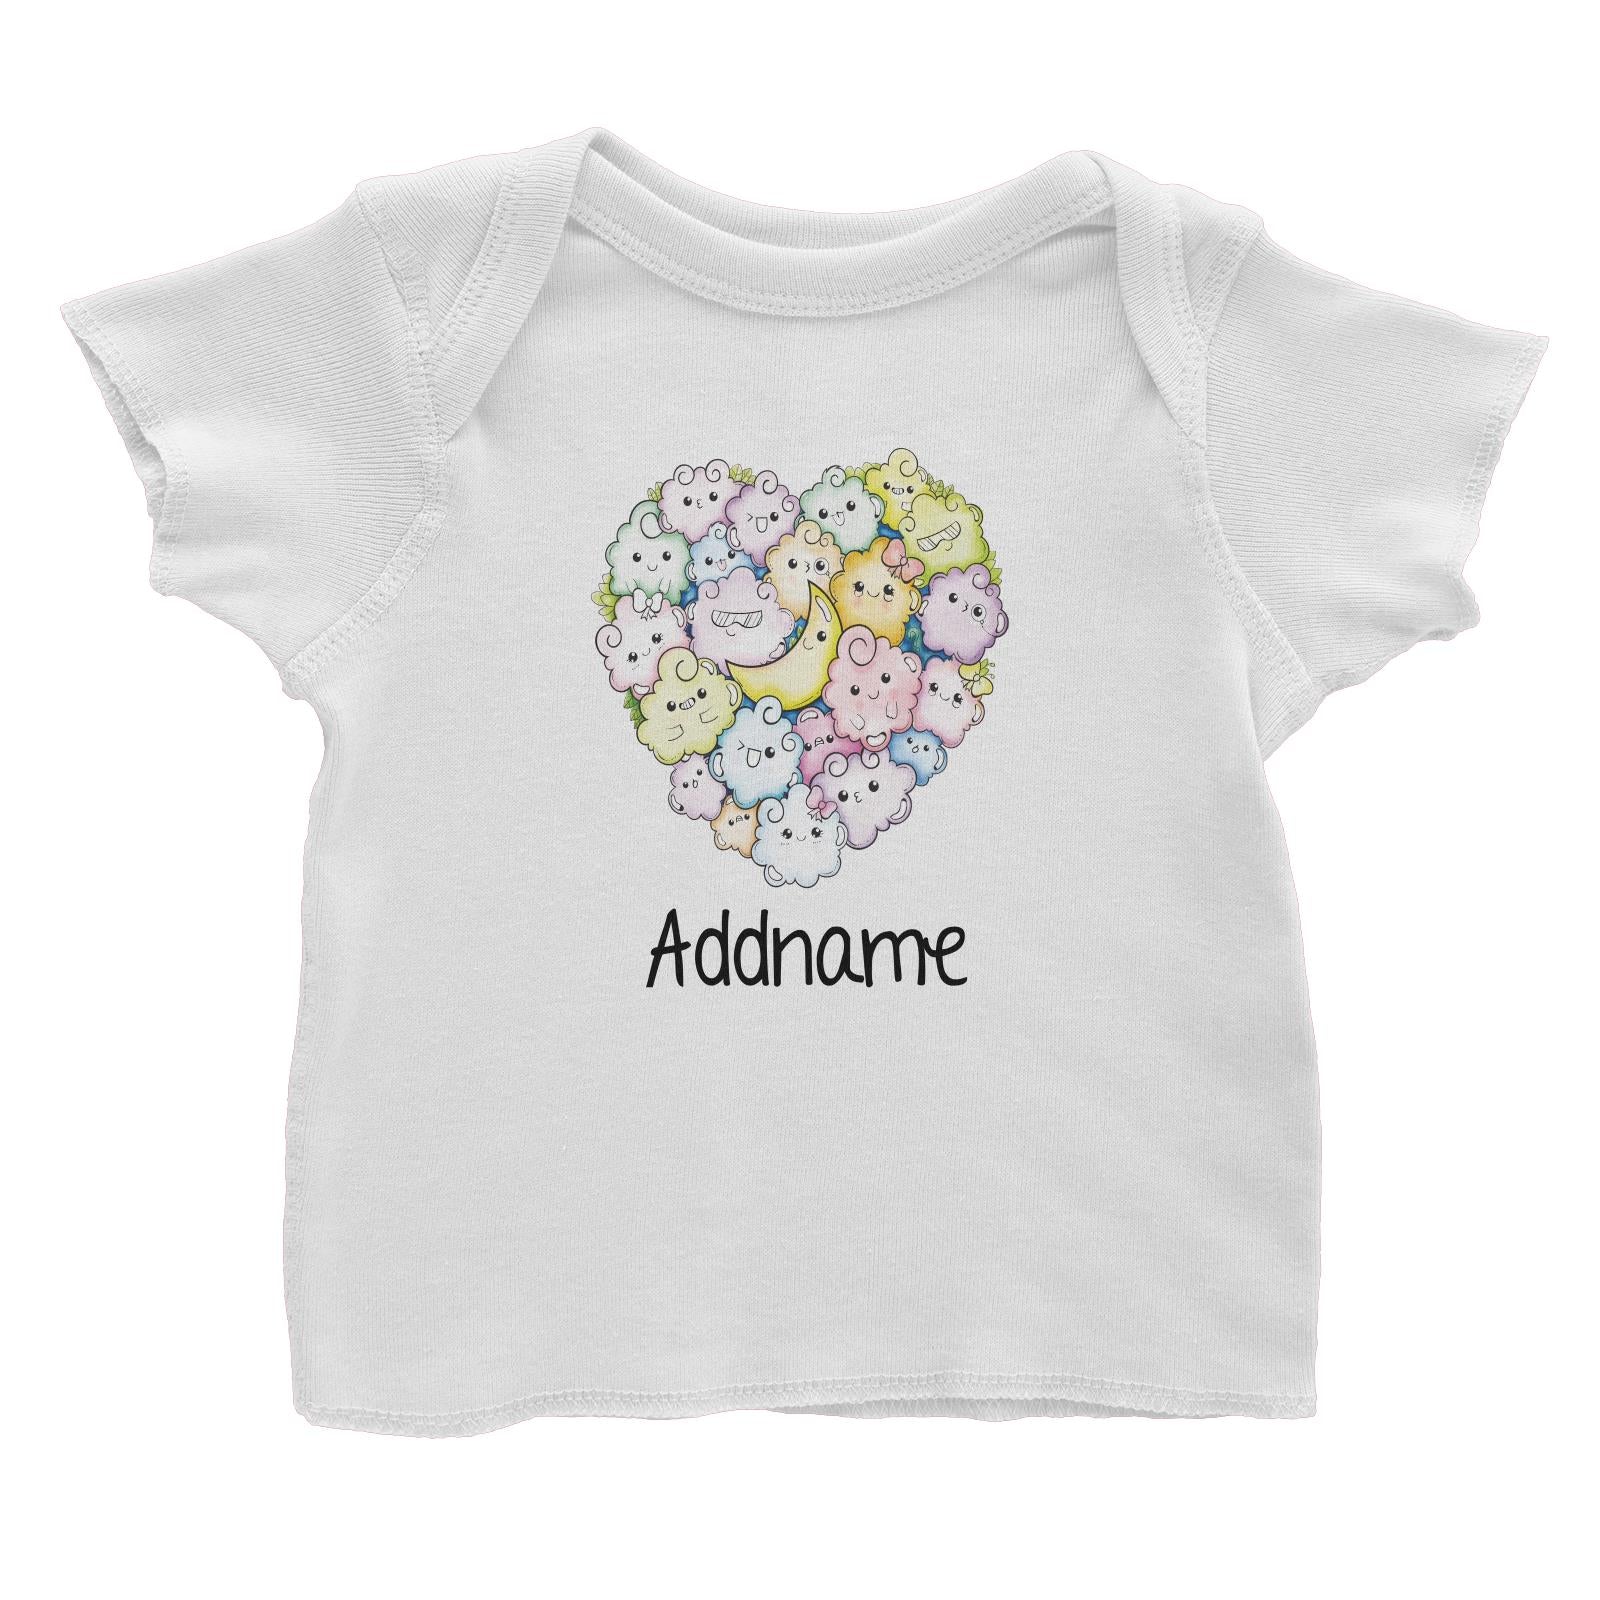 Cute Animals And Friends Series Cute Little Cloud Group Heart Addname Baby T-Shirt